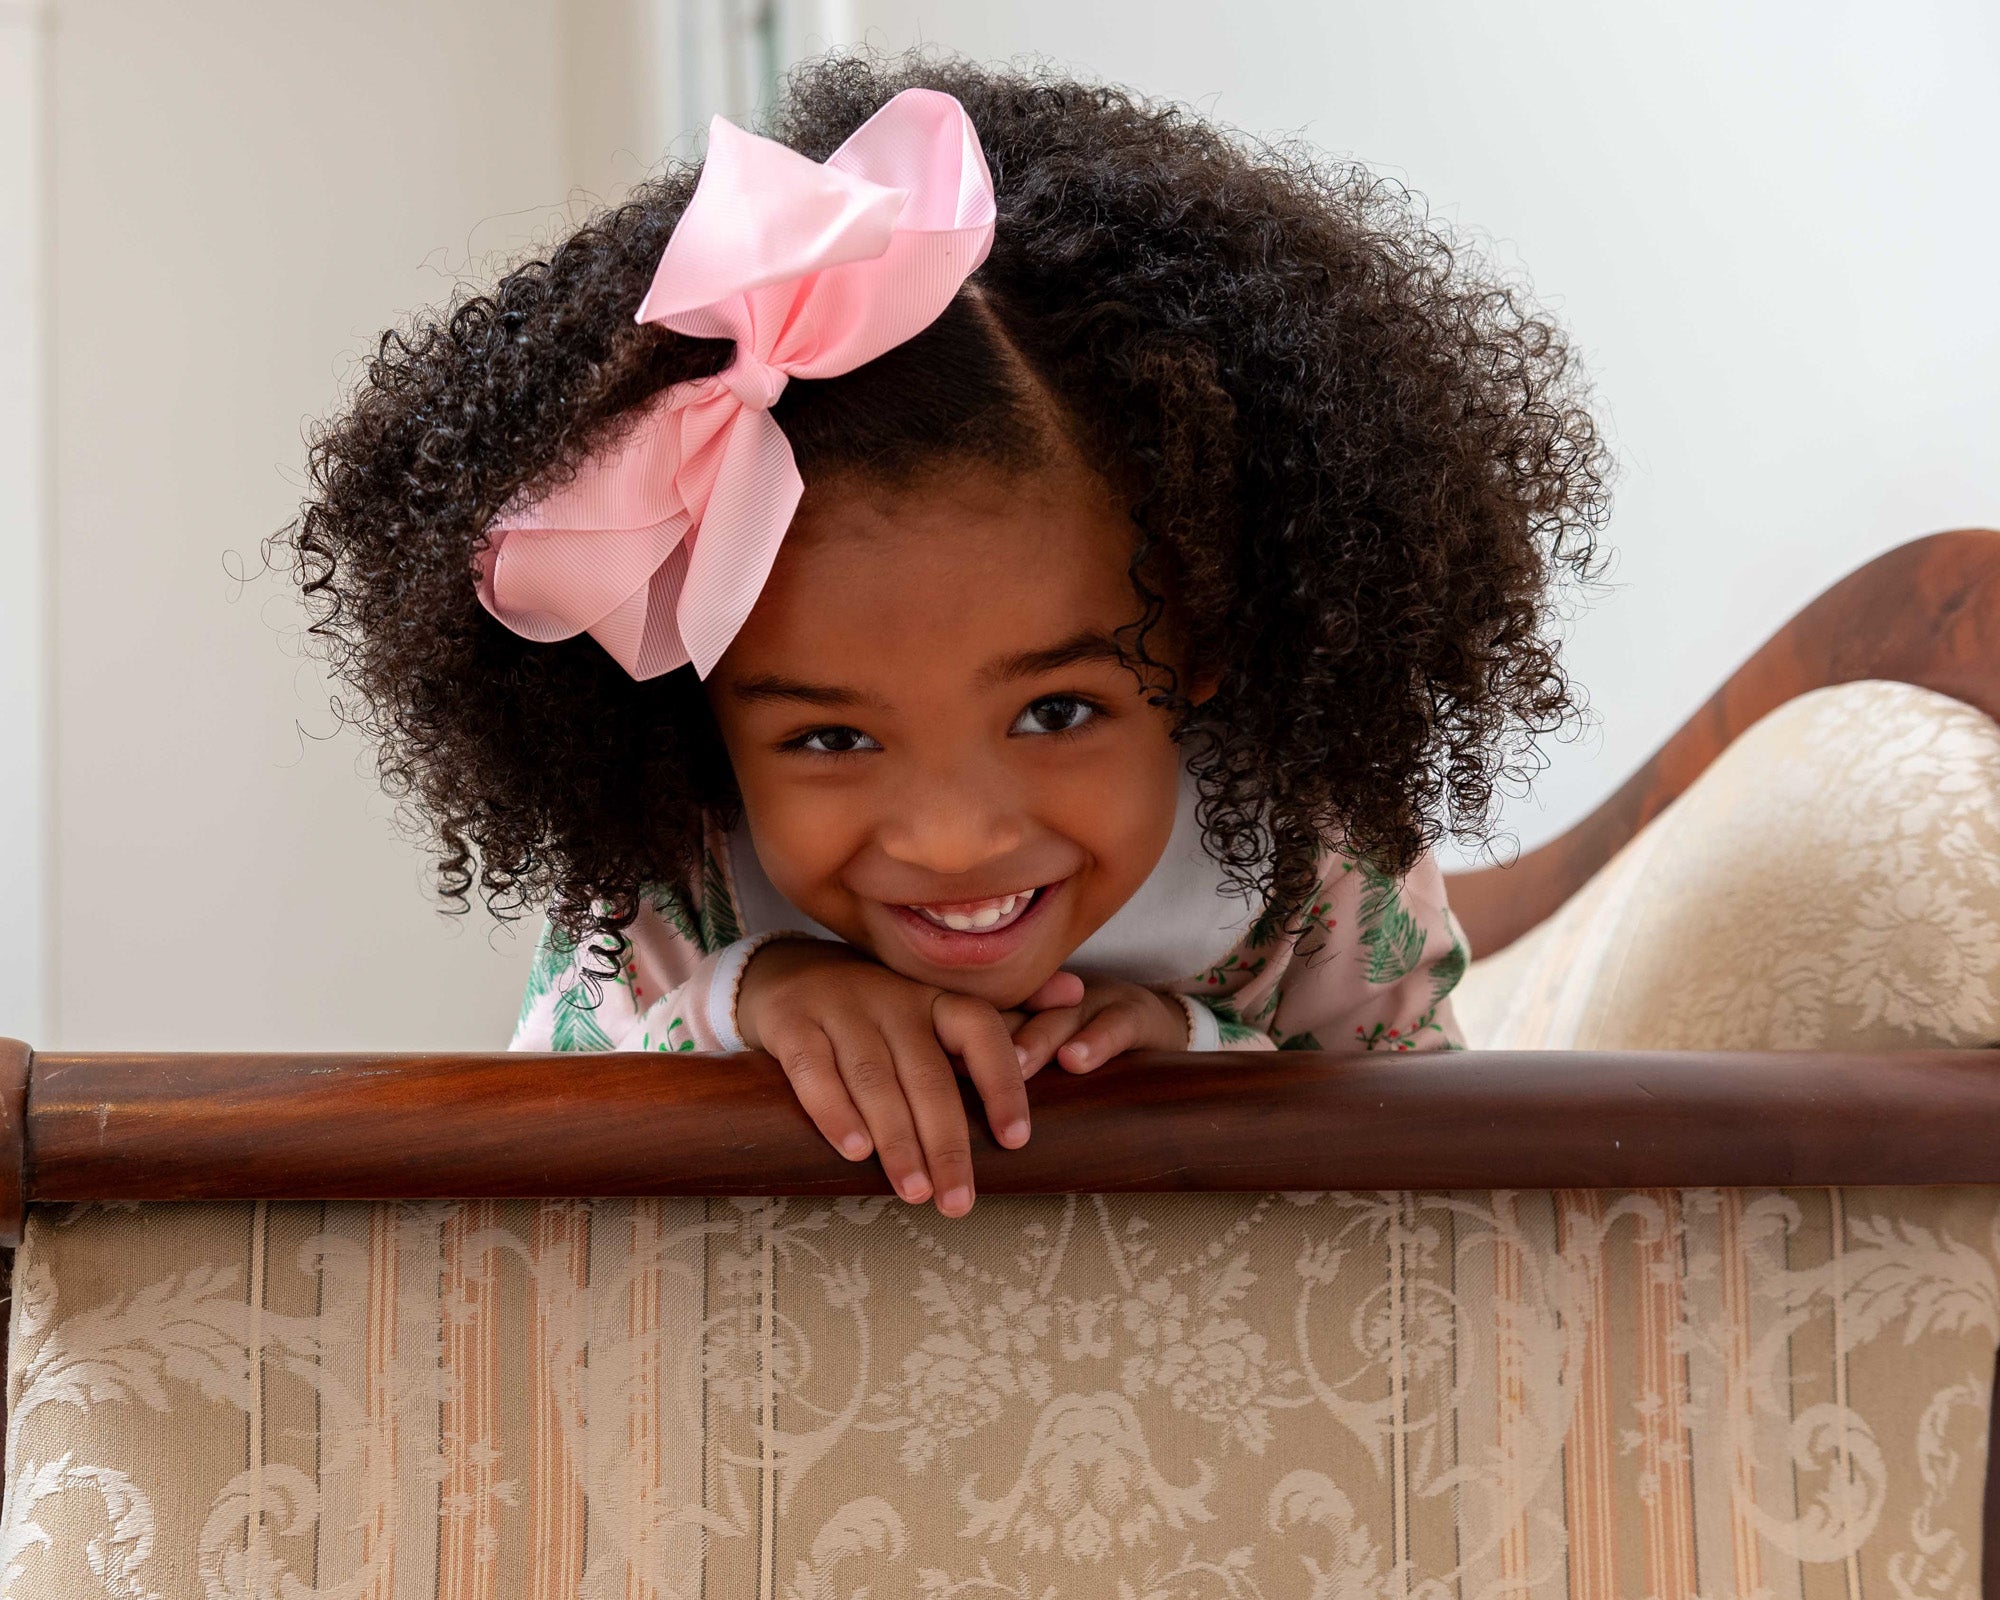 Little girl with big pink bow smiling wearing heyward house clothing